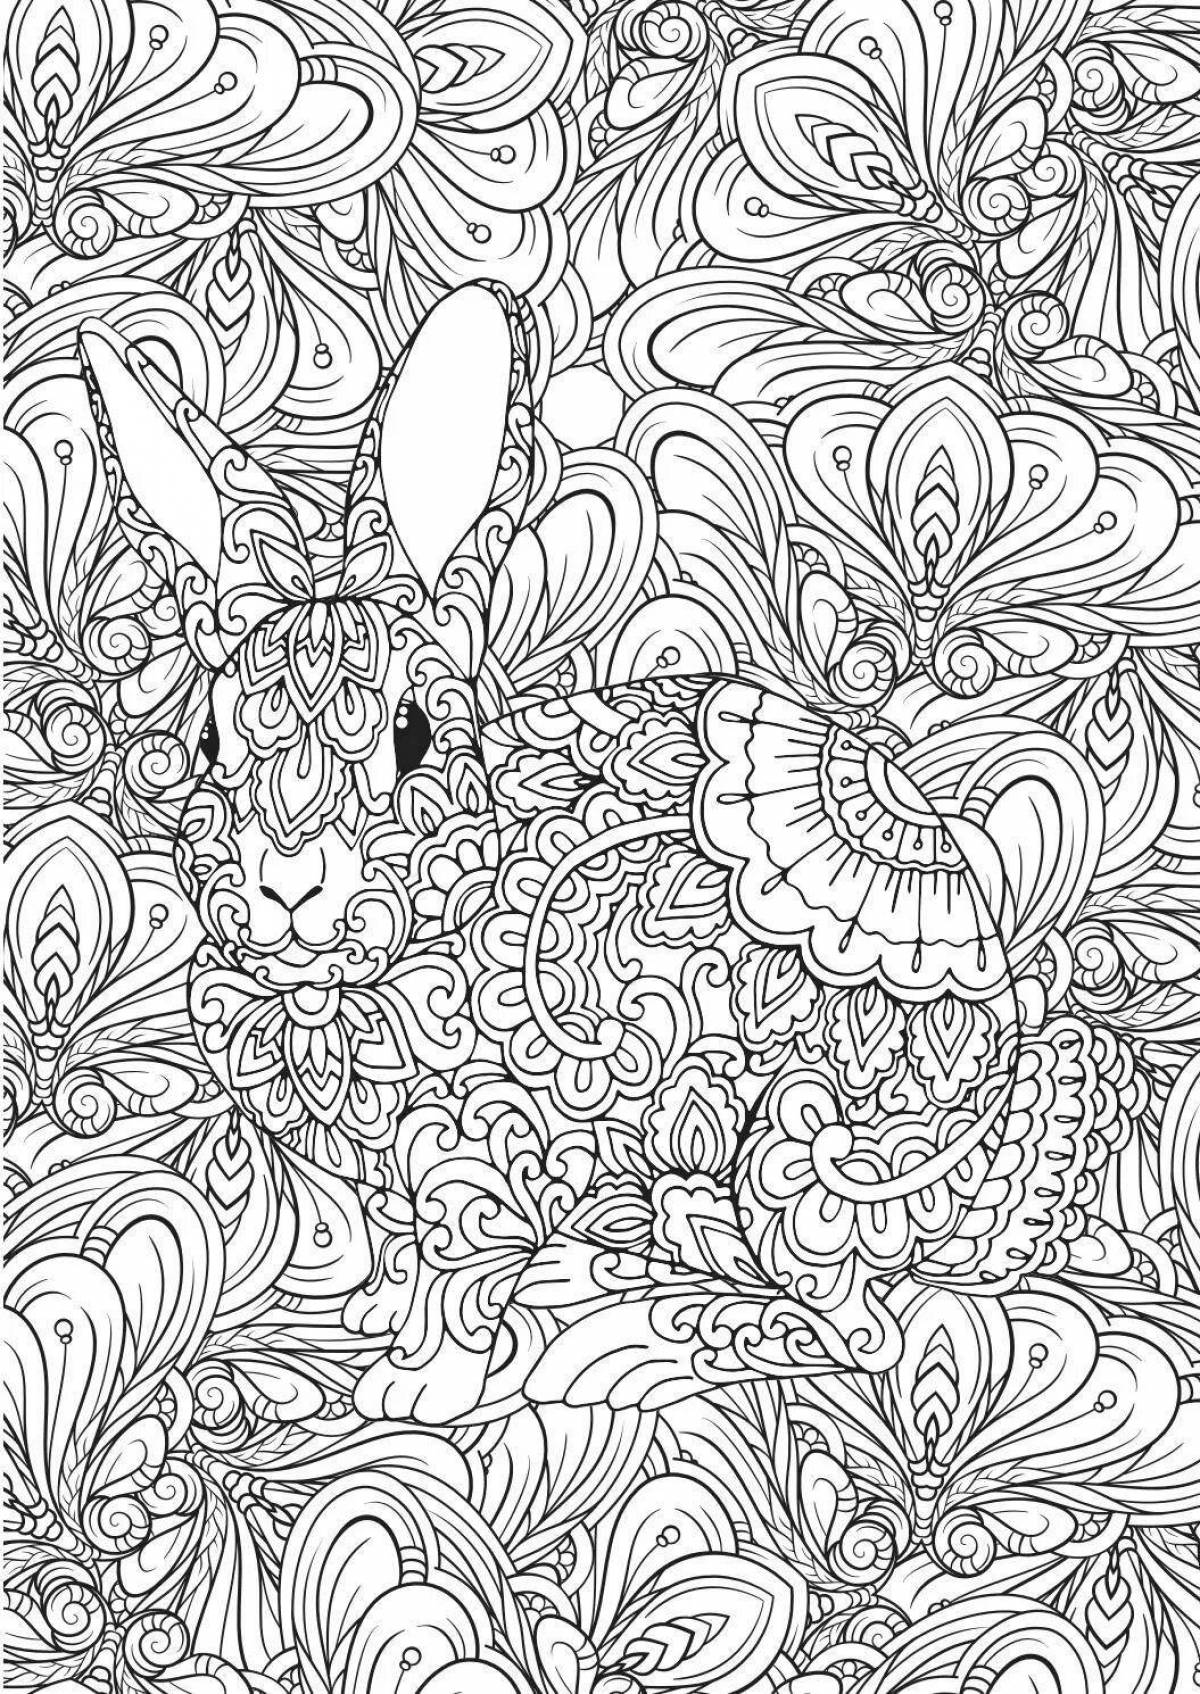 Exquisite adult coloring book, large